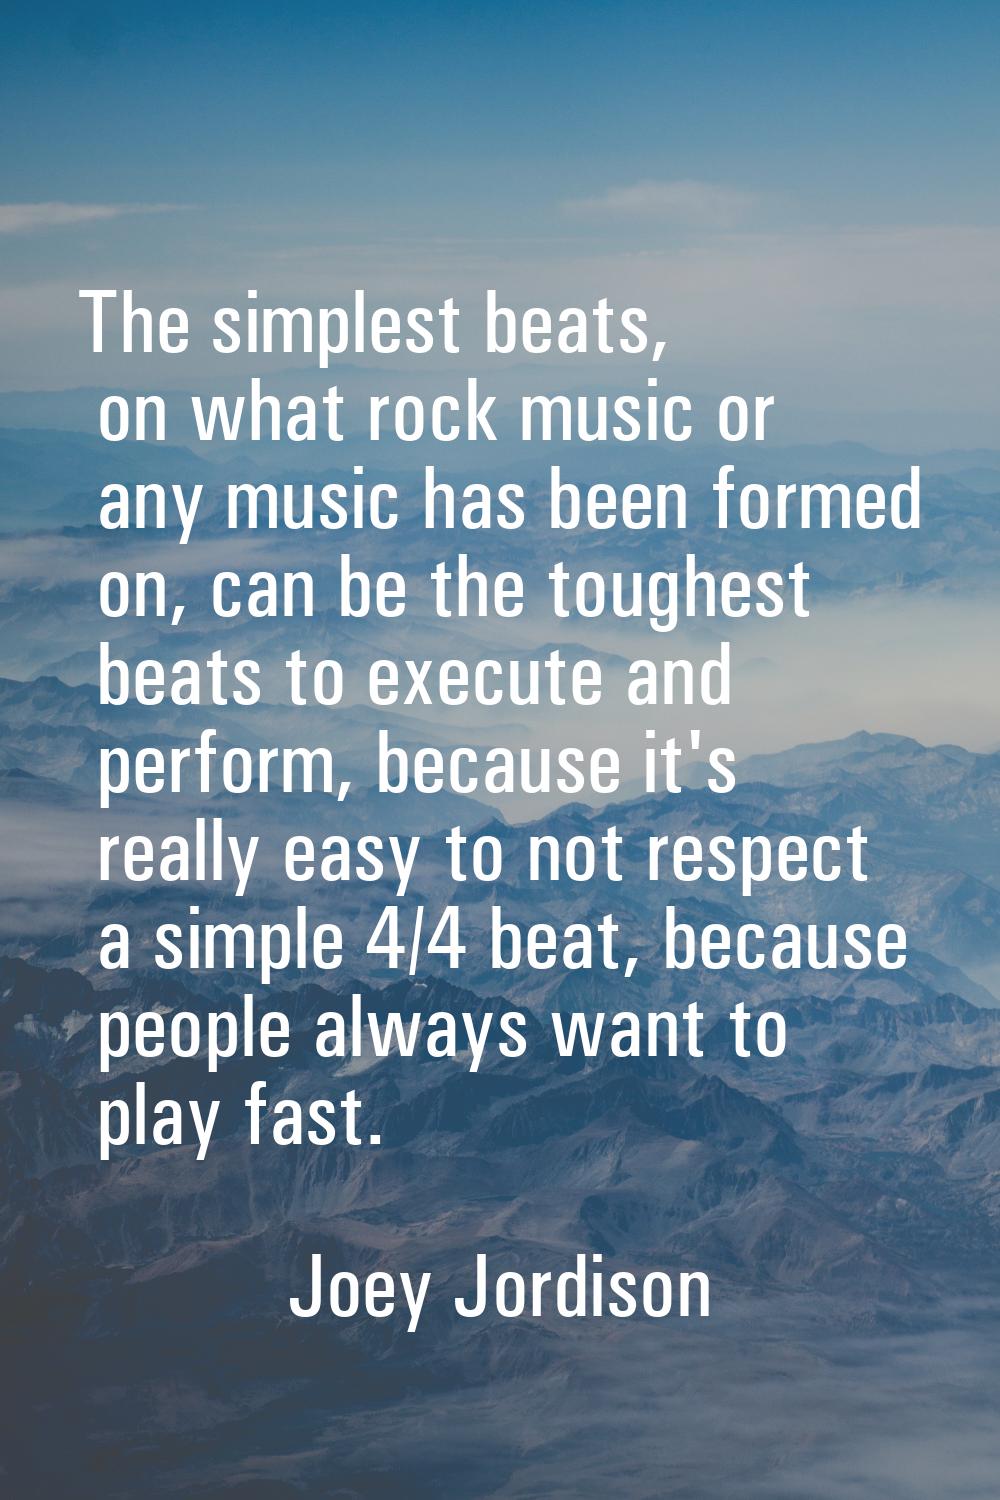 The simplest beats, on what rock music or any music has been formed on, can be the toughest beats t